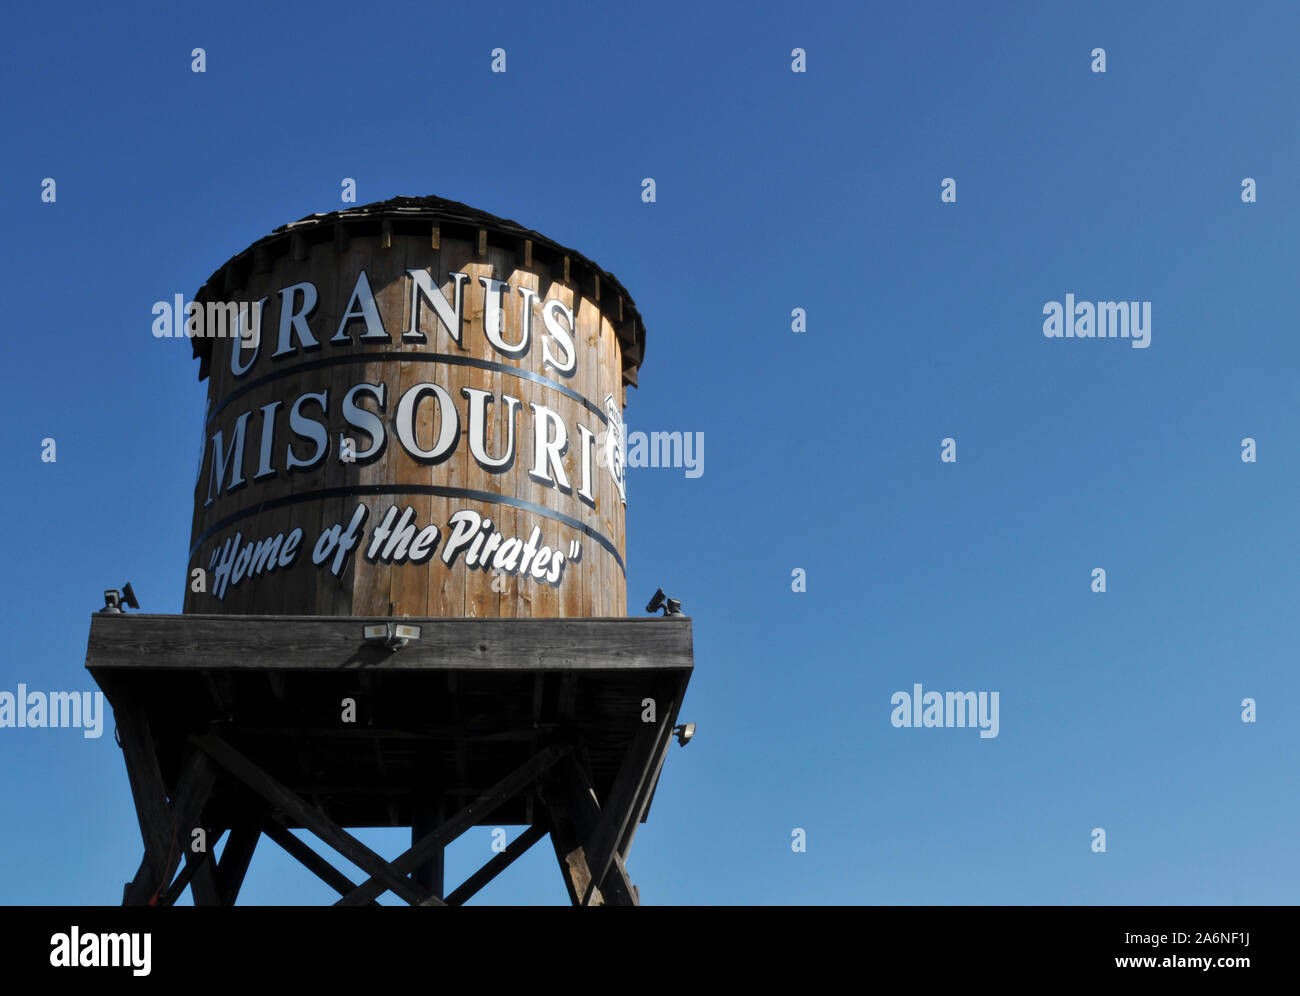 An old-fashioned water tower stands at Uranus, Missouri, a quirky tourist attraction along old Route 66, east of Fort Leonard Wood. Stock Photo